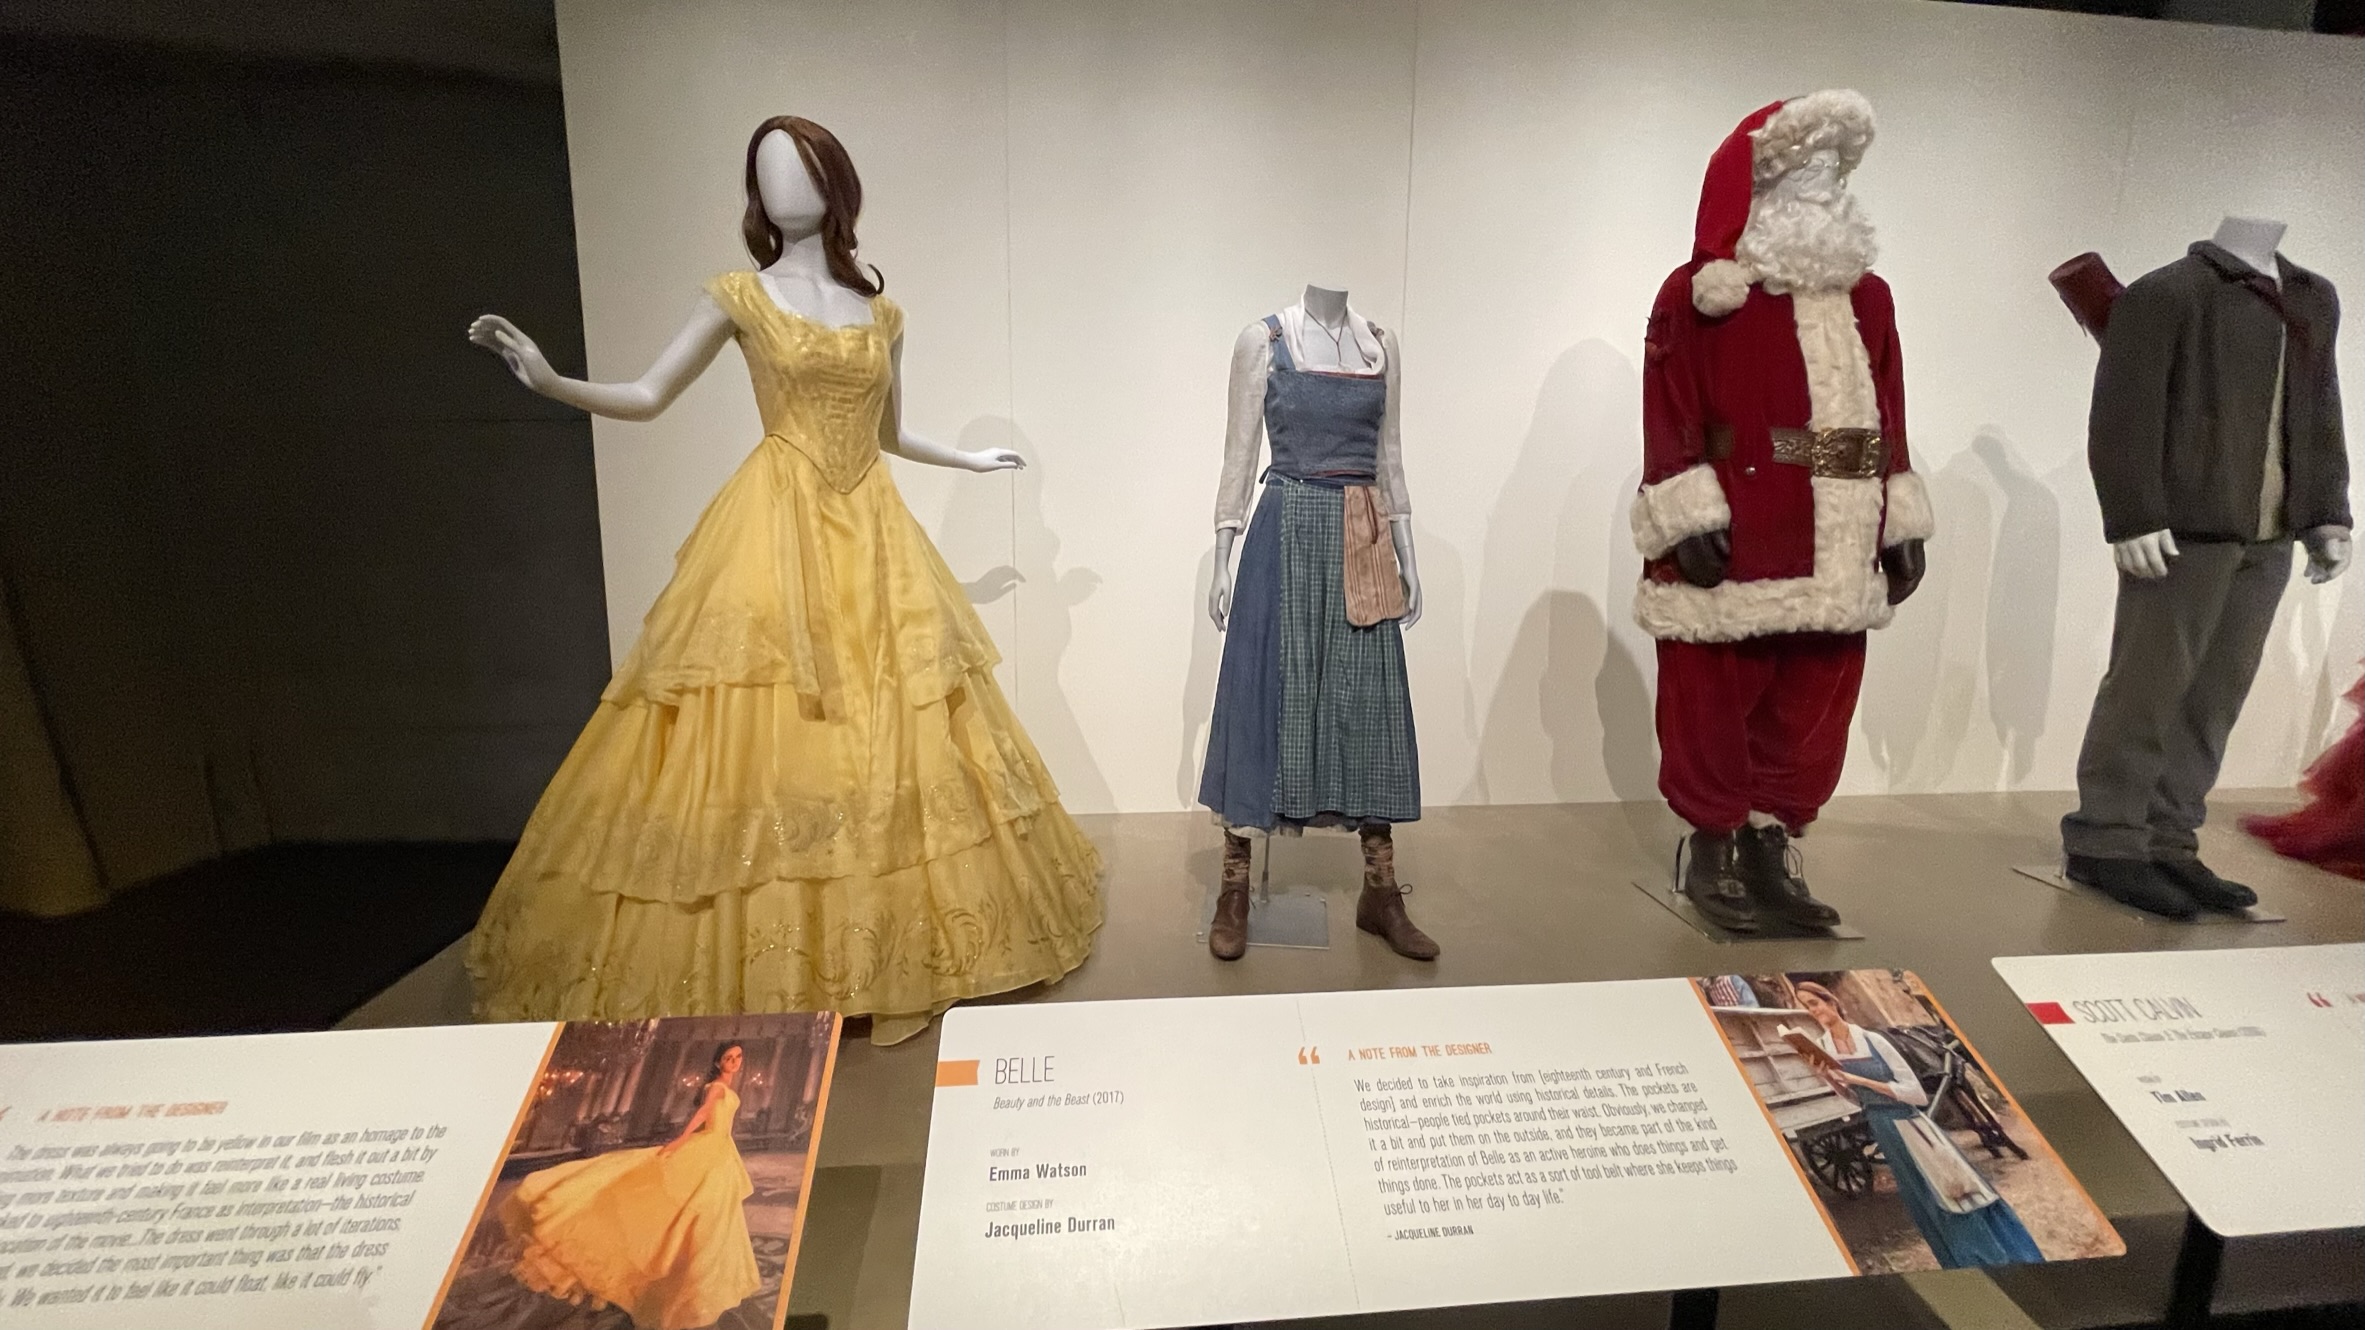 Disney Archives Disney Heroes & Villains: The Art of the Disney Costume 'Cinderella's Workshop Disney Costumes include Belle as played by Emma Watson